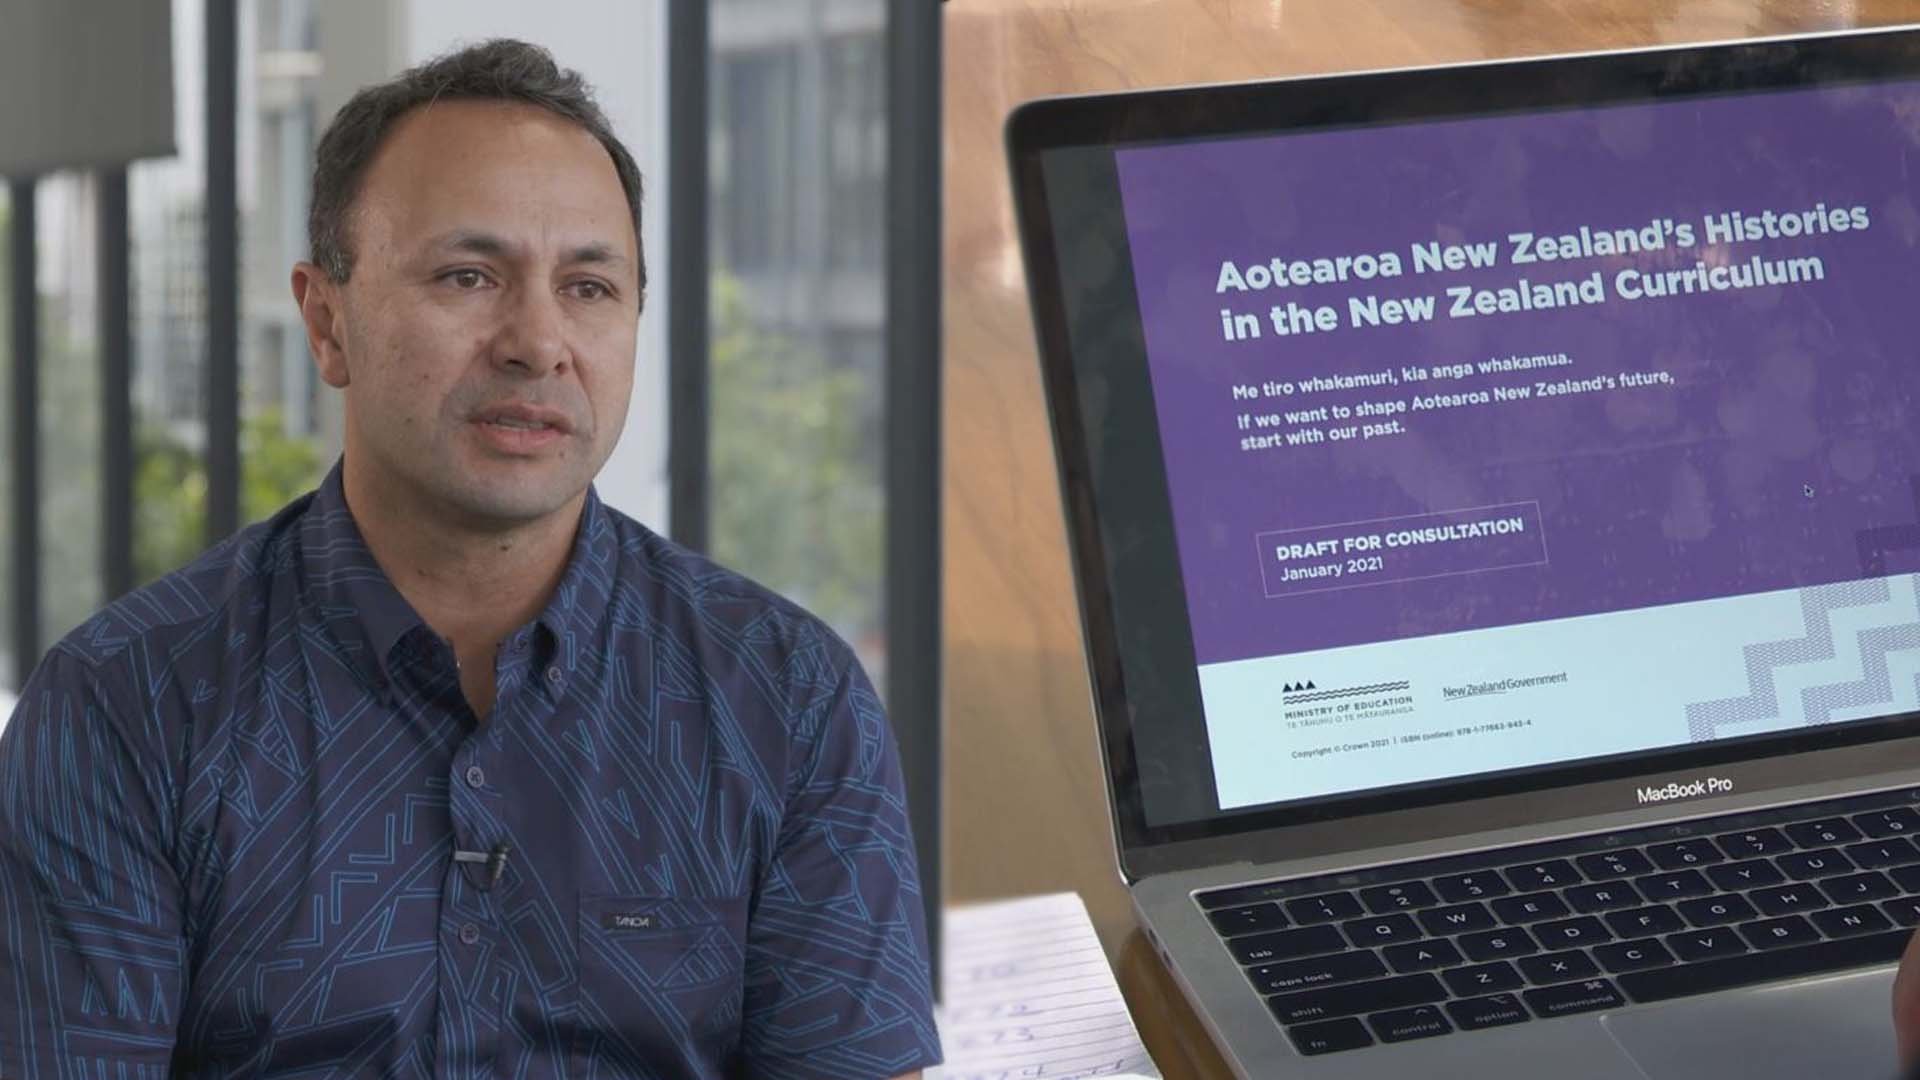 Pacific scholars like Damon Salesa are looking closely at the New Zealand History Draft Curriculum